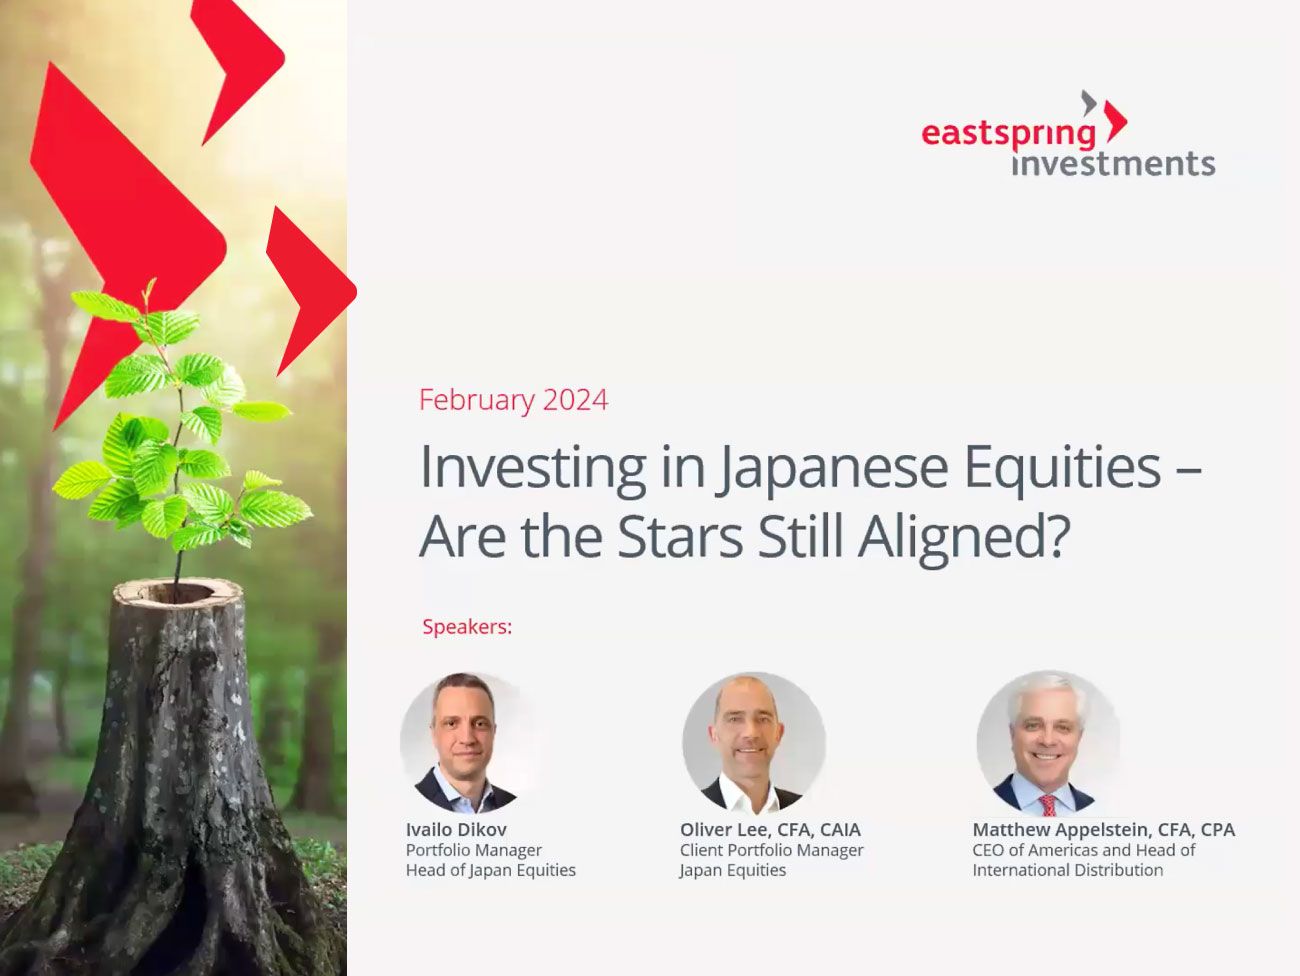 Investing in Japanese Equities - Are the Stars Still Aligned?